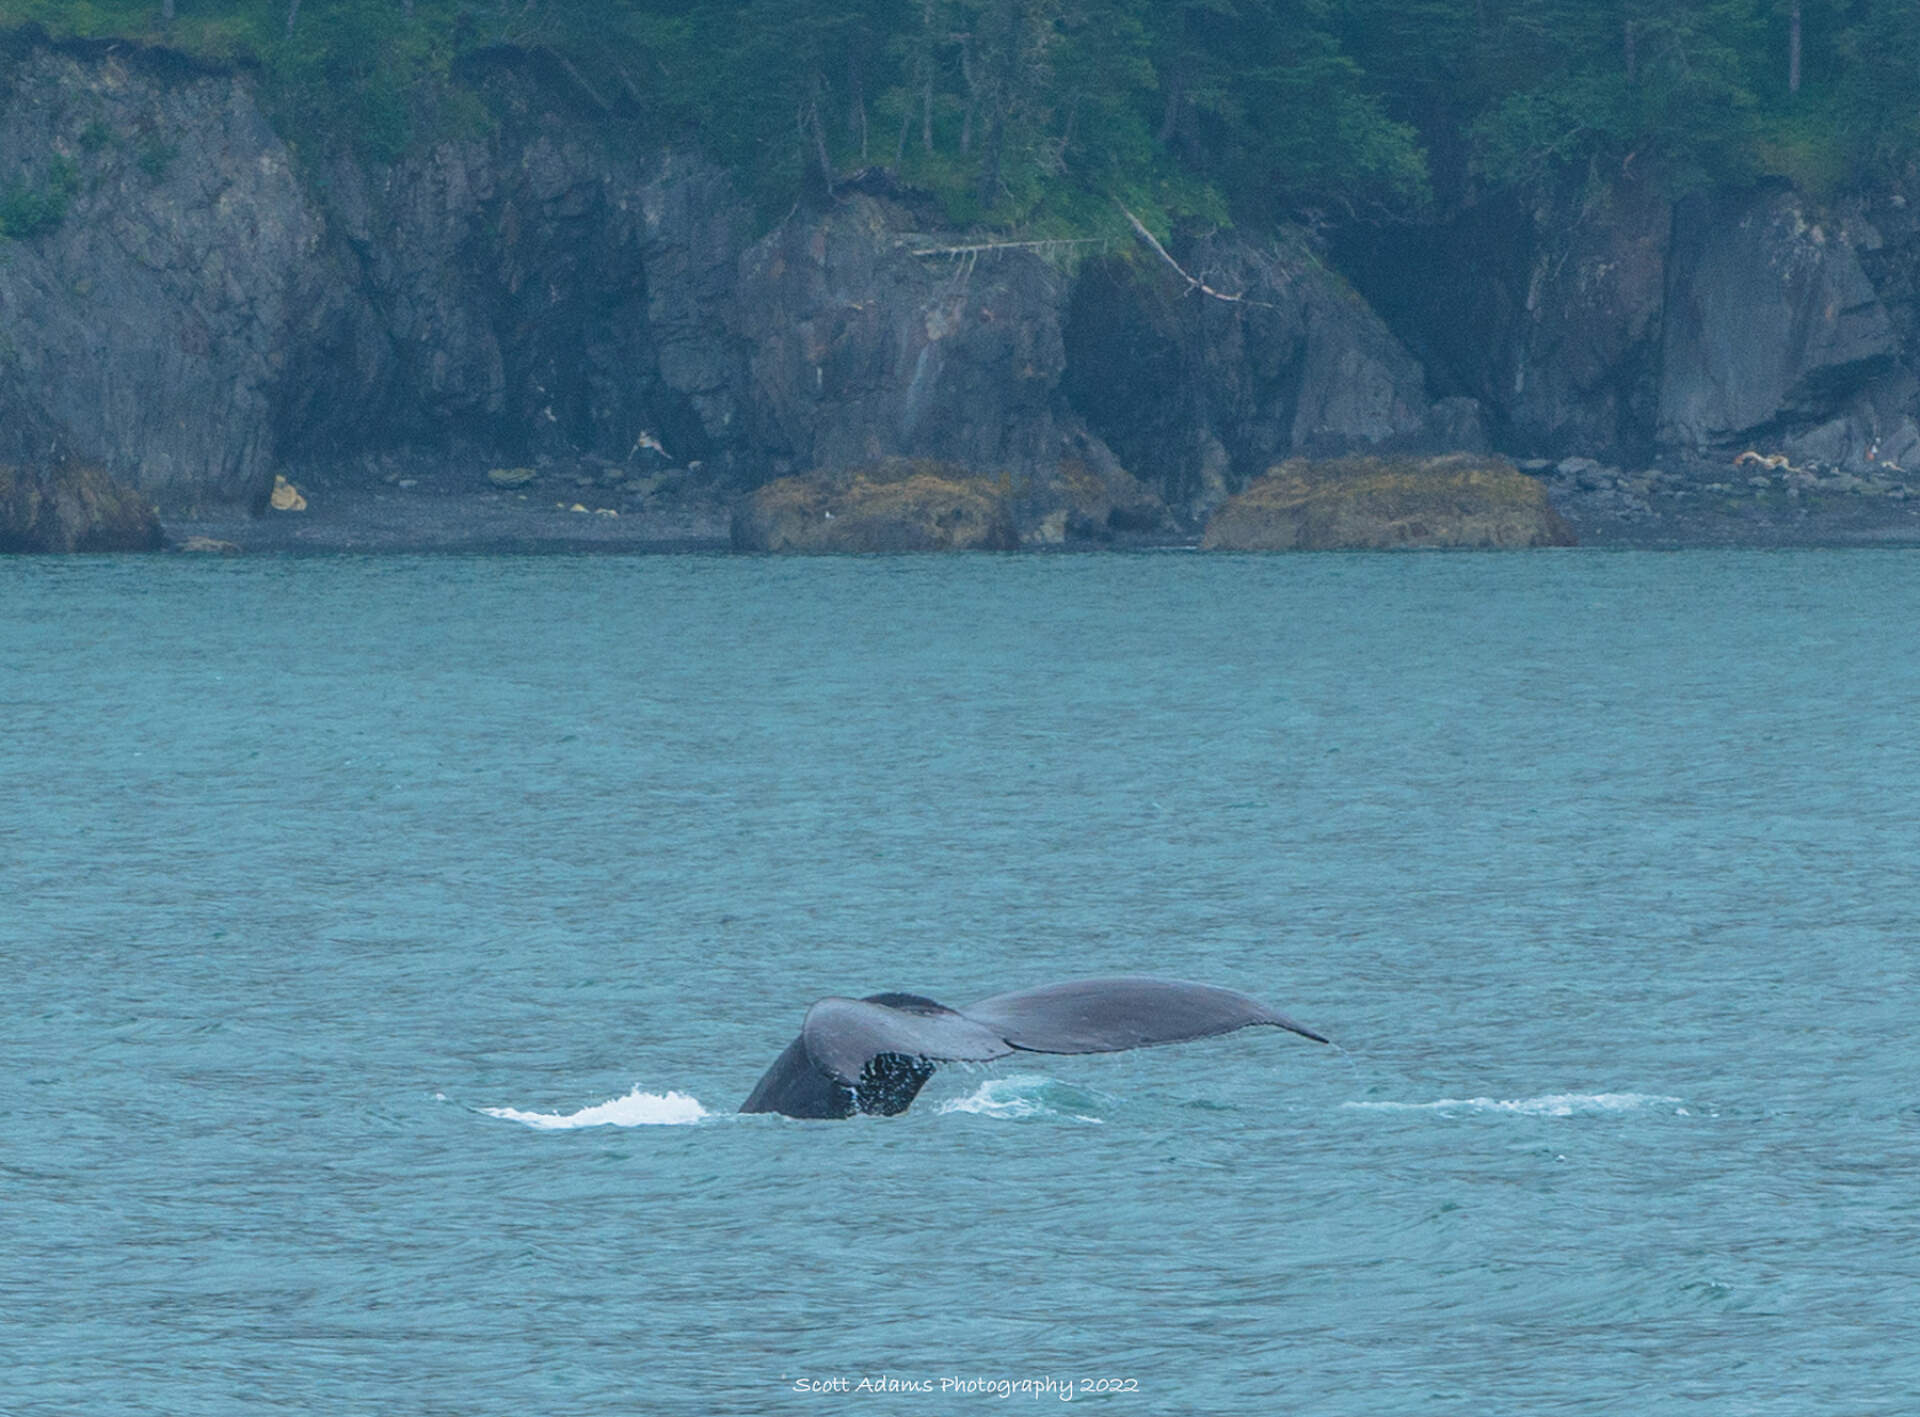 A whale tale emerges from the water in Kenai Fjords National Park, Alaska.